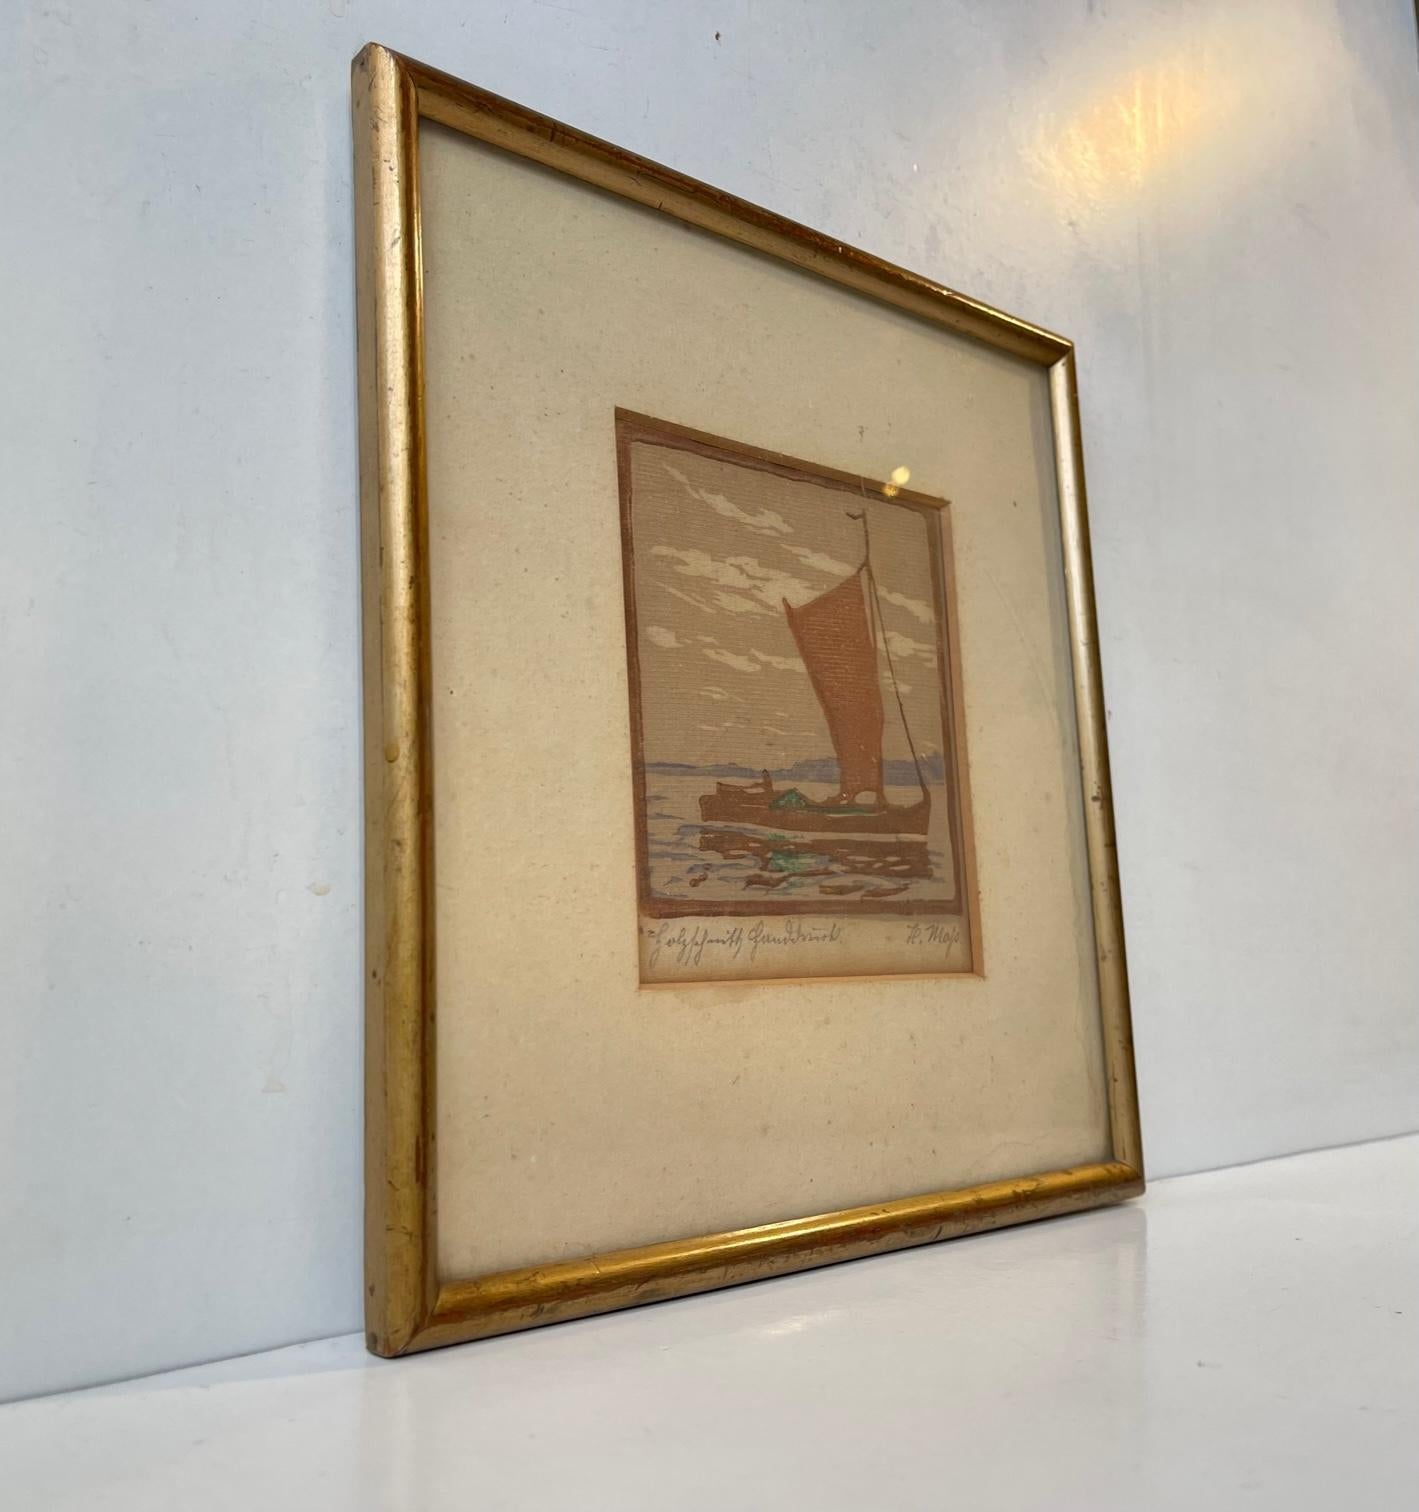 Small and 'quick' motif of a sailboat. Painted with pastel watercolors on fabric/textile. Signed and titled by unidentified Danish artist. The partial paper mark to its back indicates that it has been exhibited. The motif measures 11x10 cm with